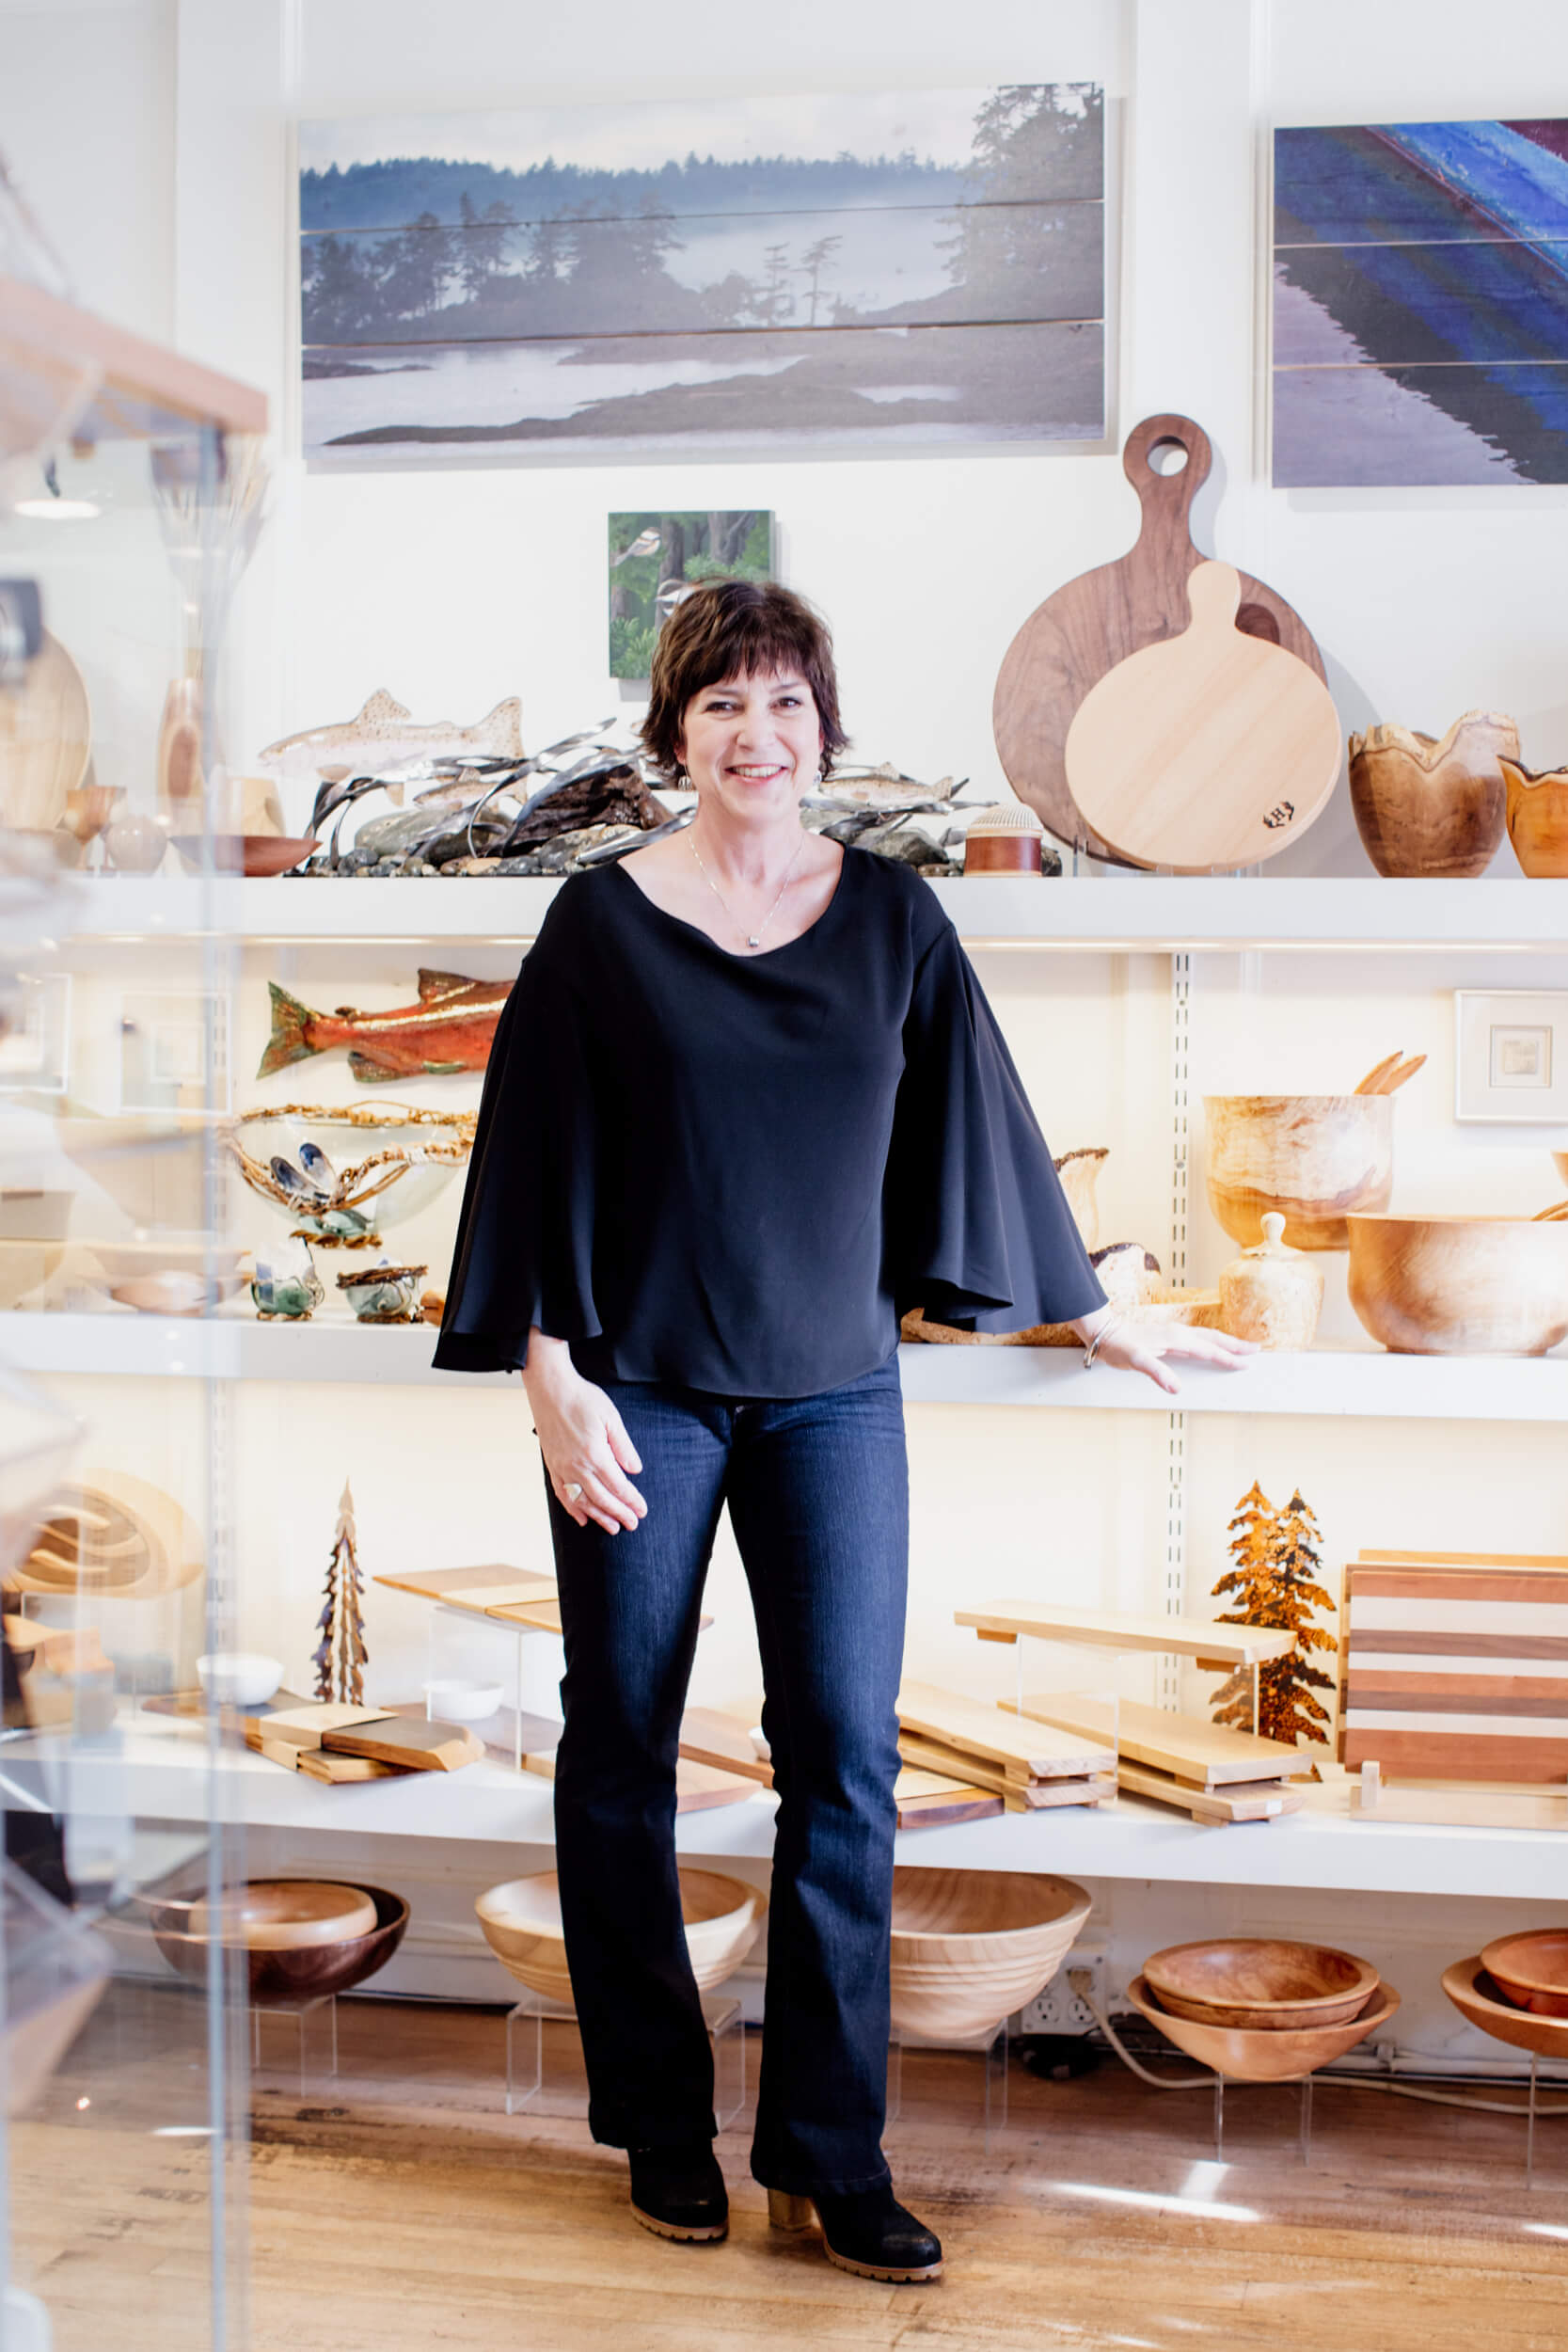 A woman stands in front of her wares in an art shop.